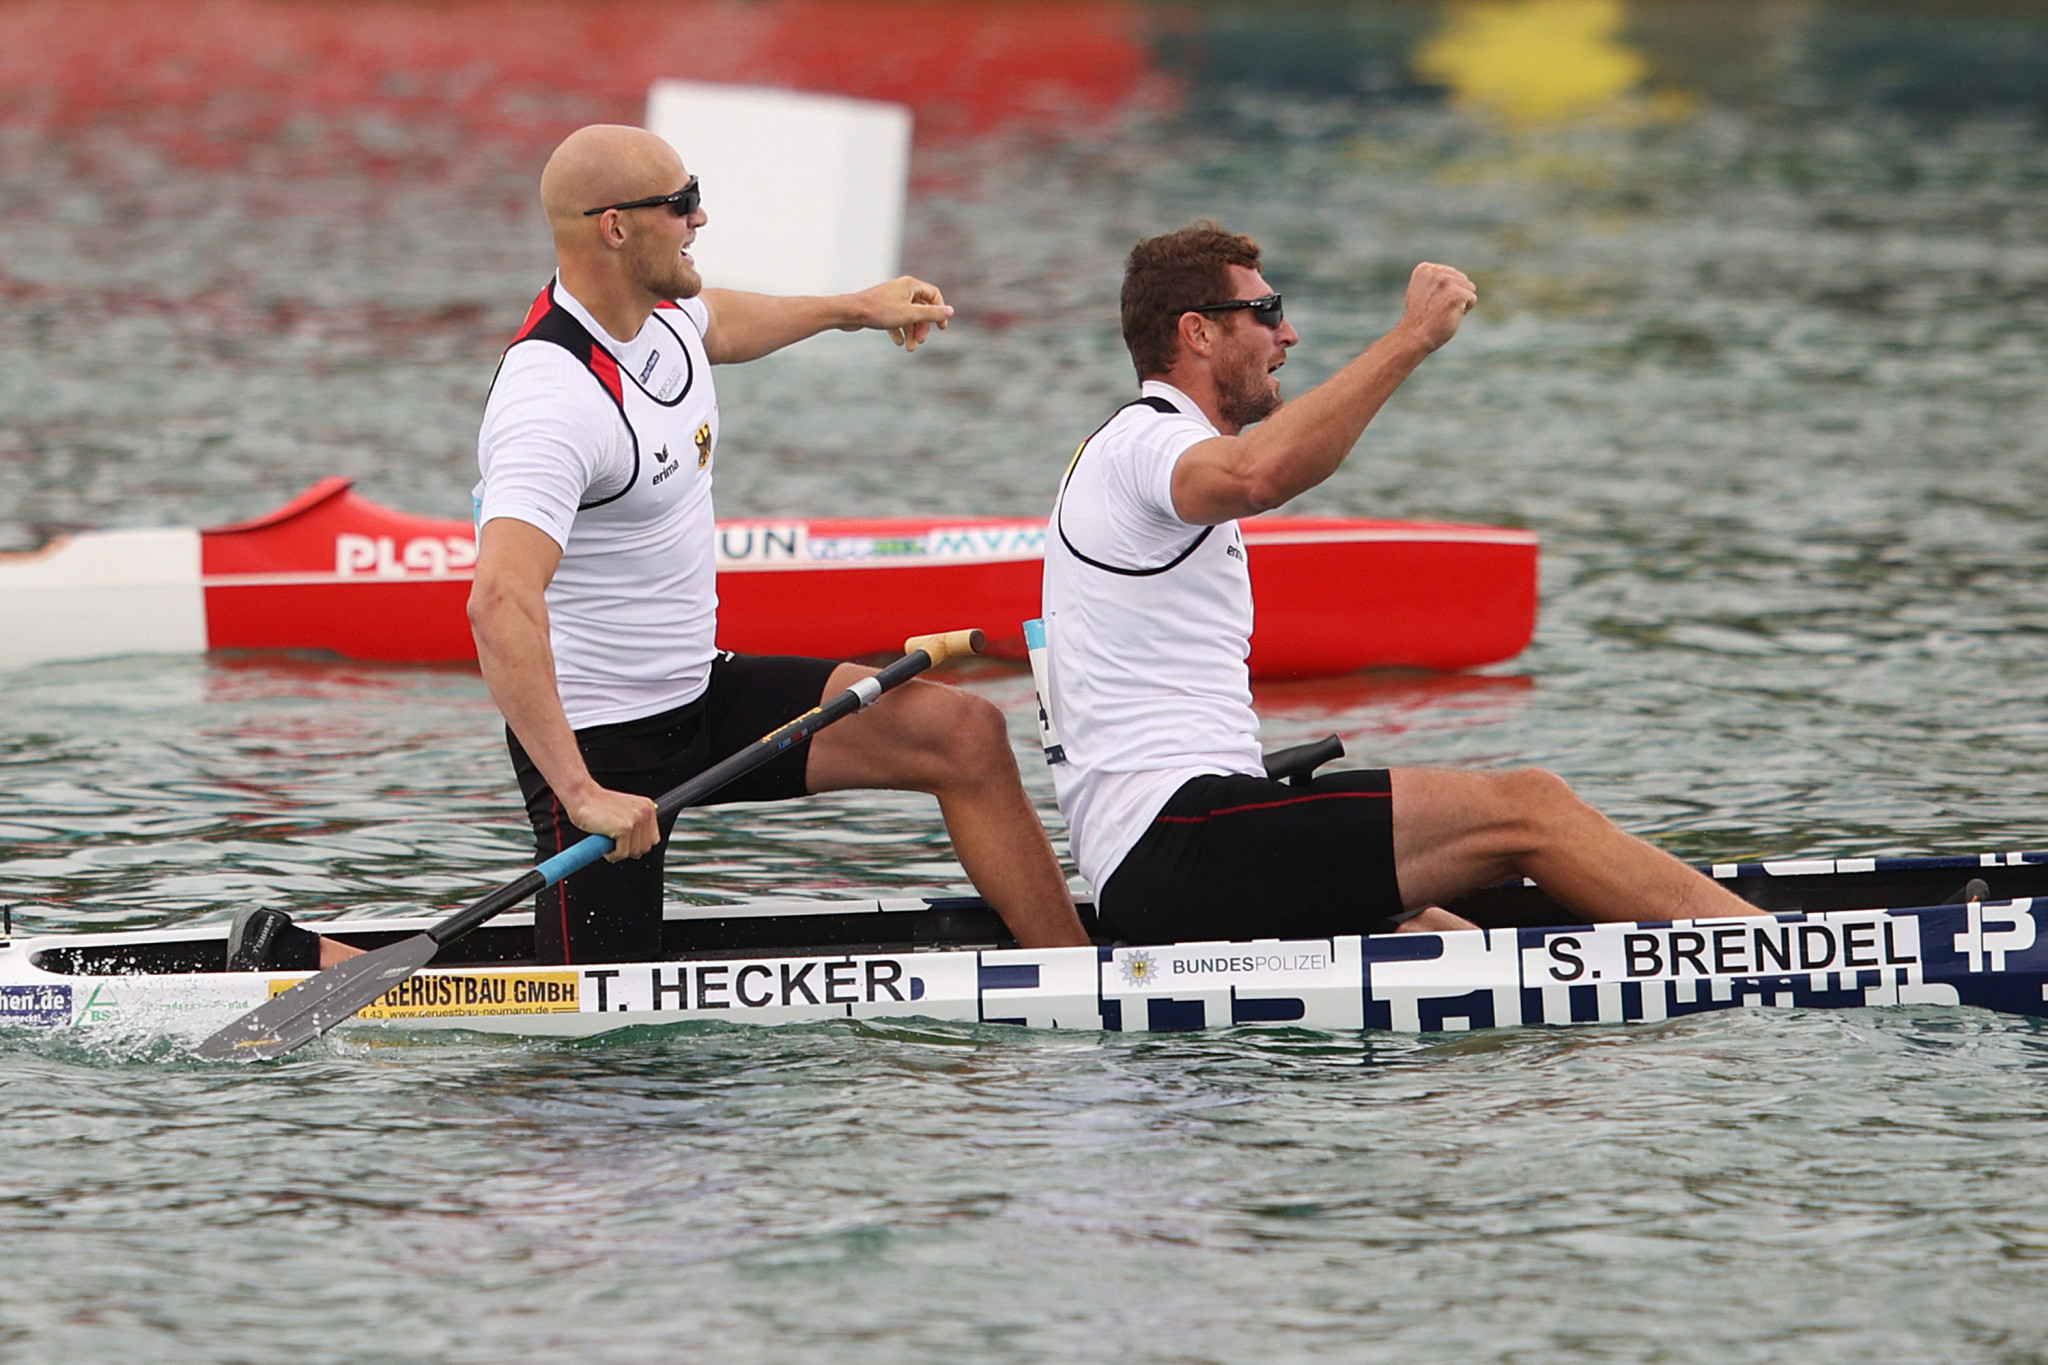 Sebastian Brendel, right, and Tim Hecker, left, defended their men's C1 1,000m European title for Germany in Munich ©Getty Images